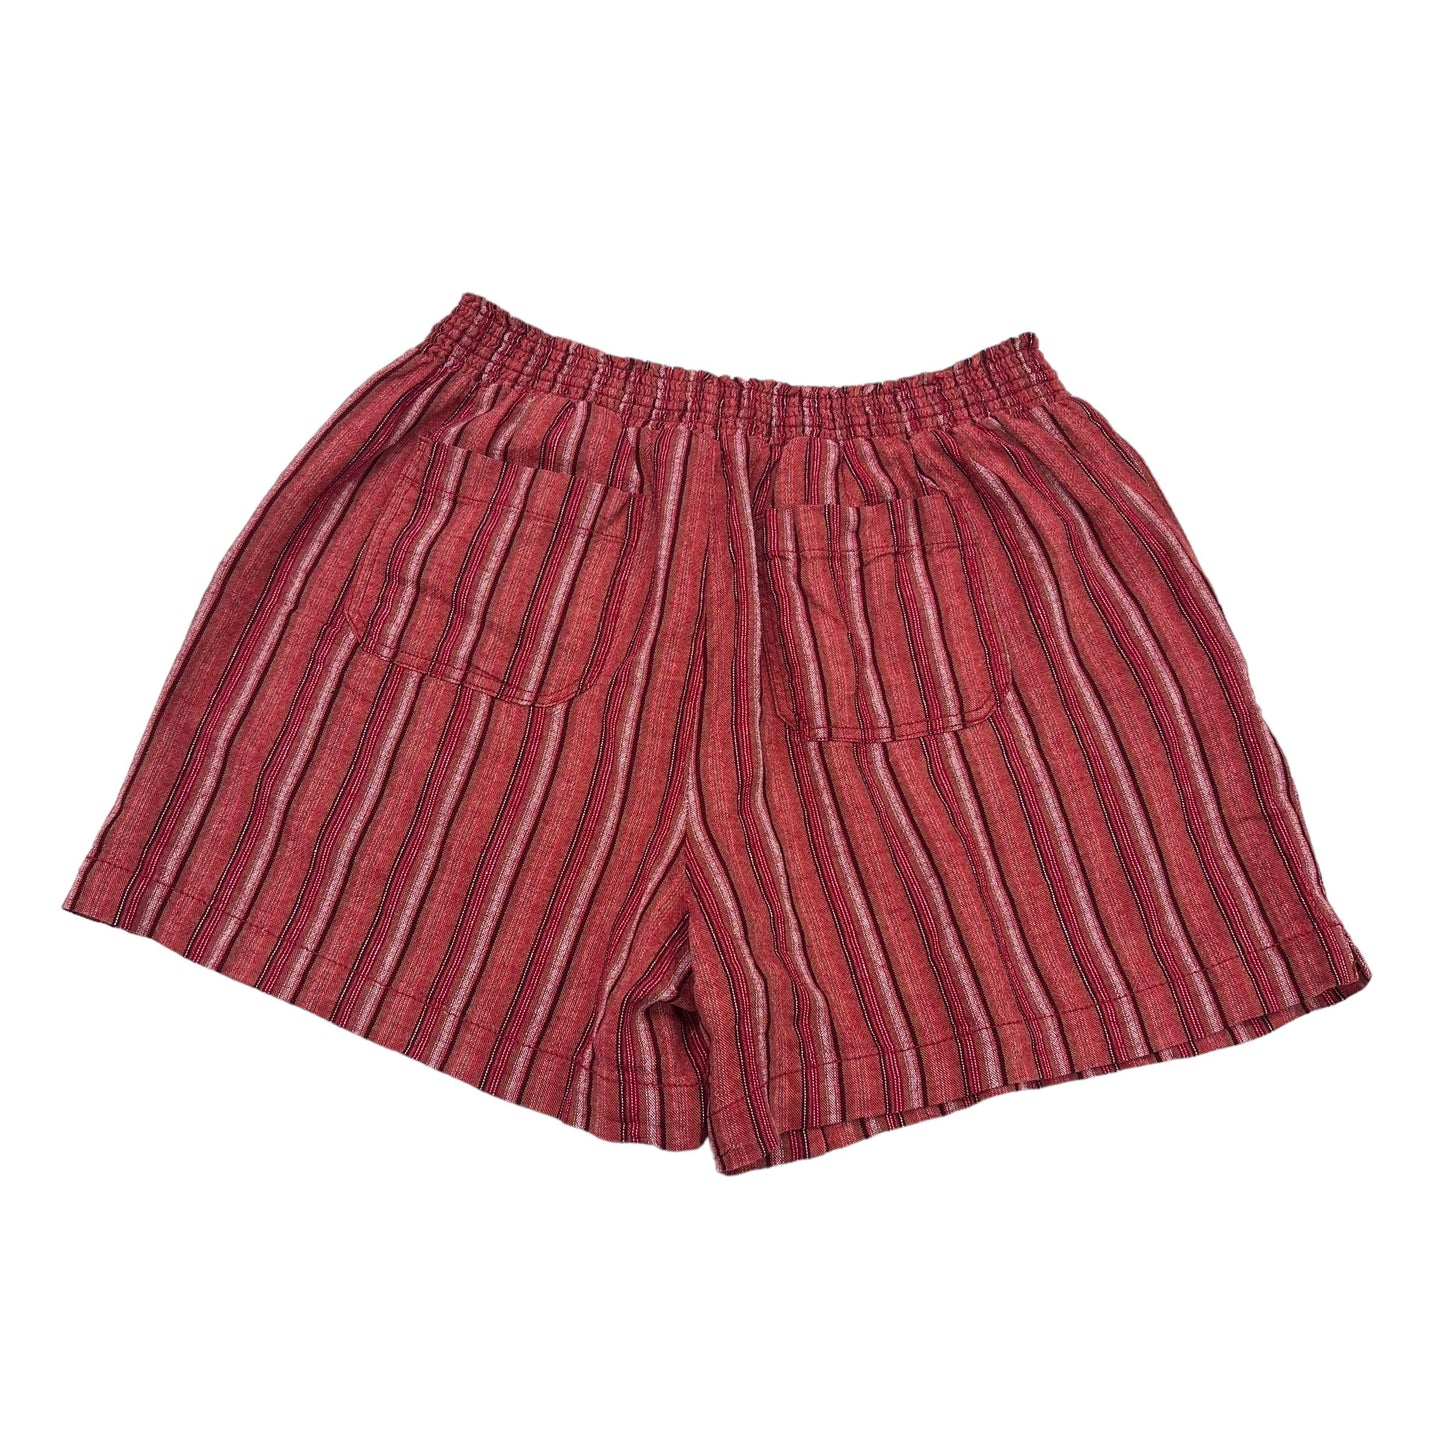 RED SHORTS by BRIGGS Size:L